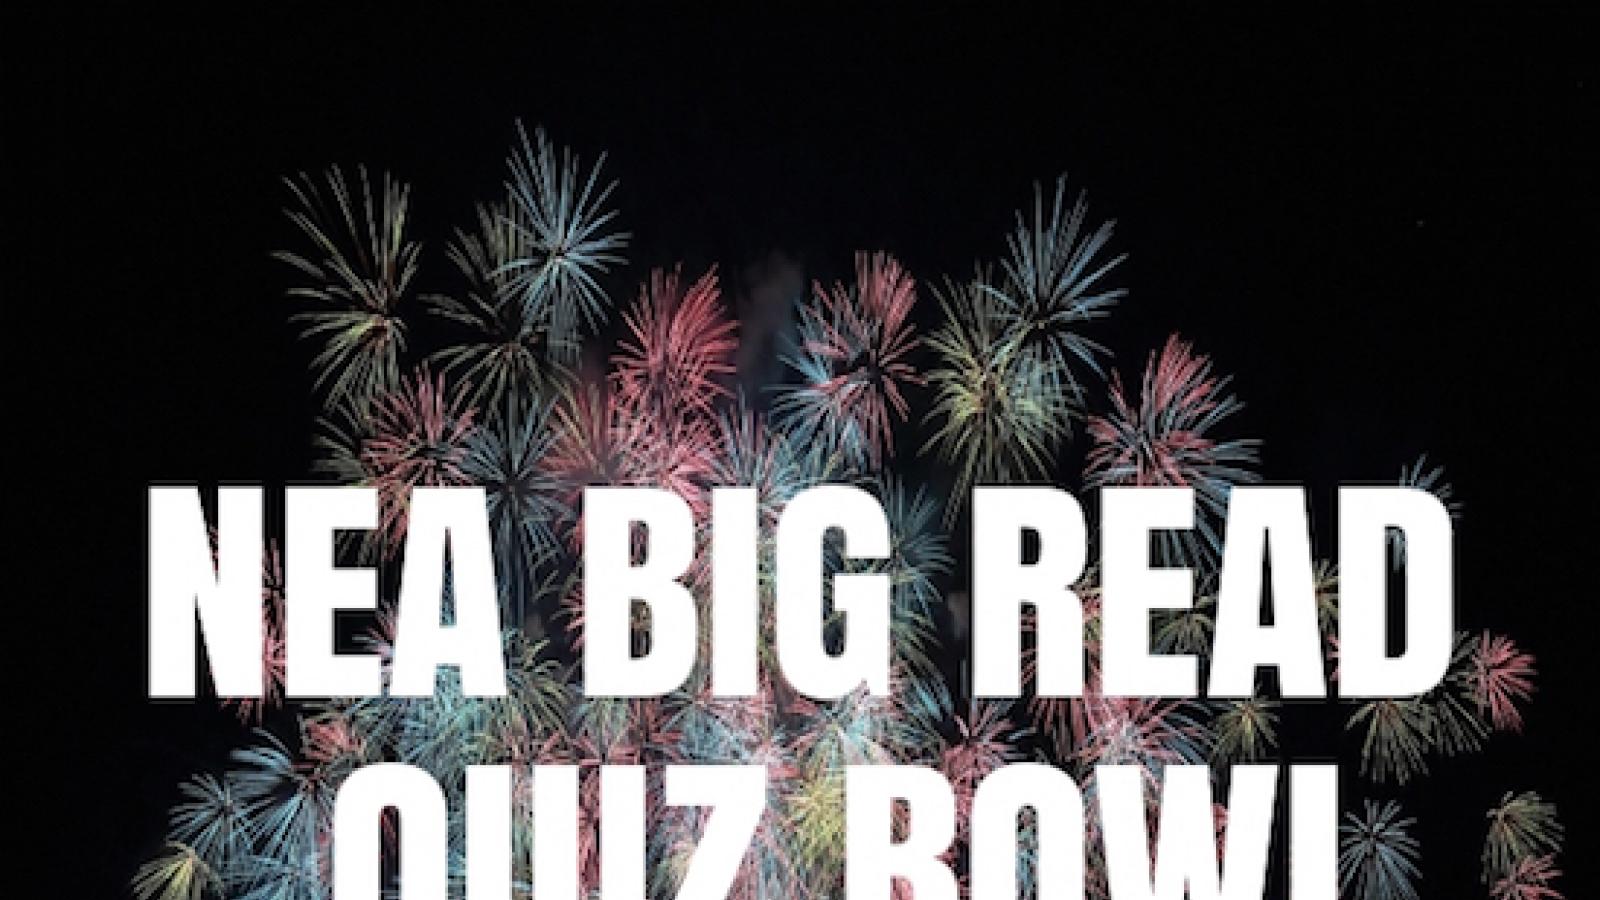 graphic with fireworks in background and white text reading nea big read quiz bowl